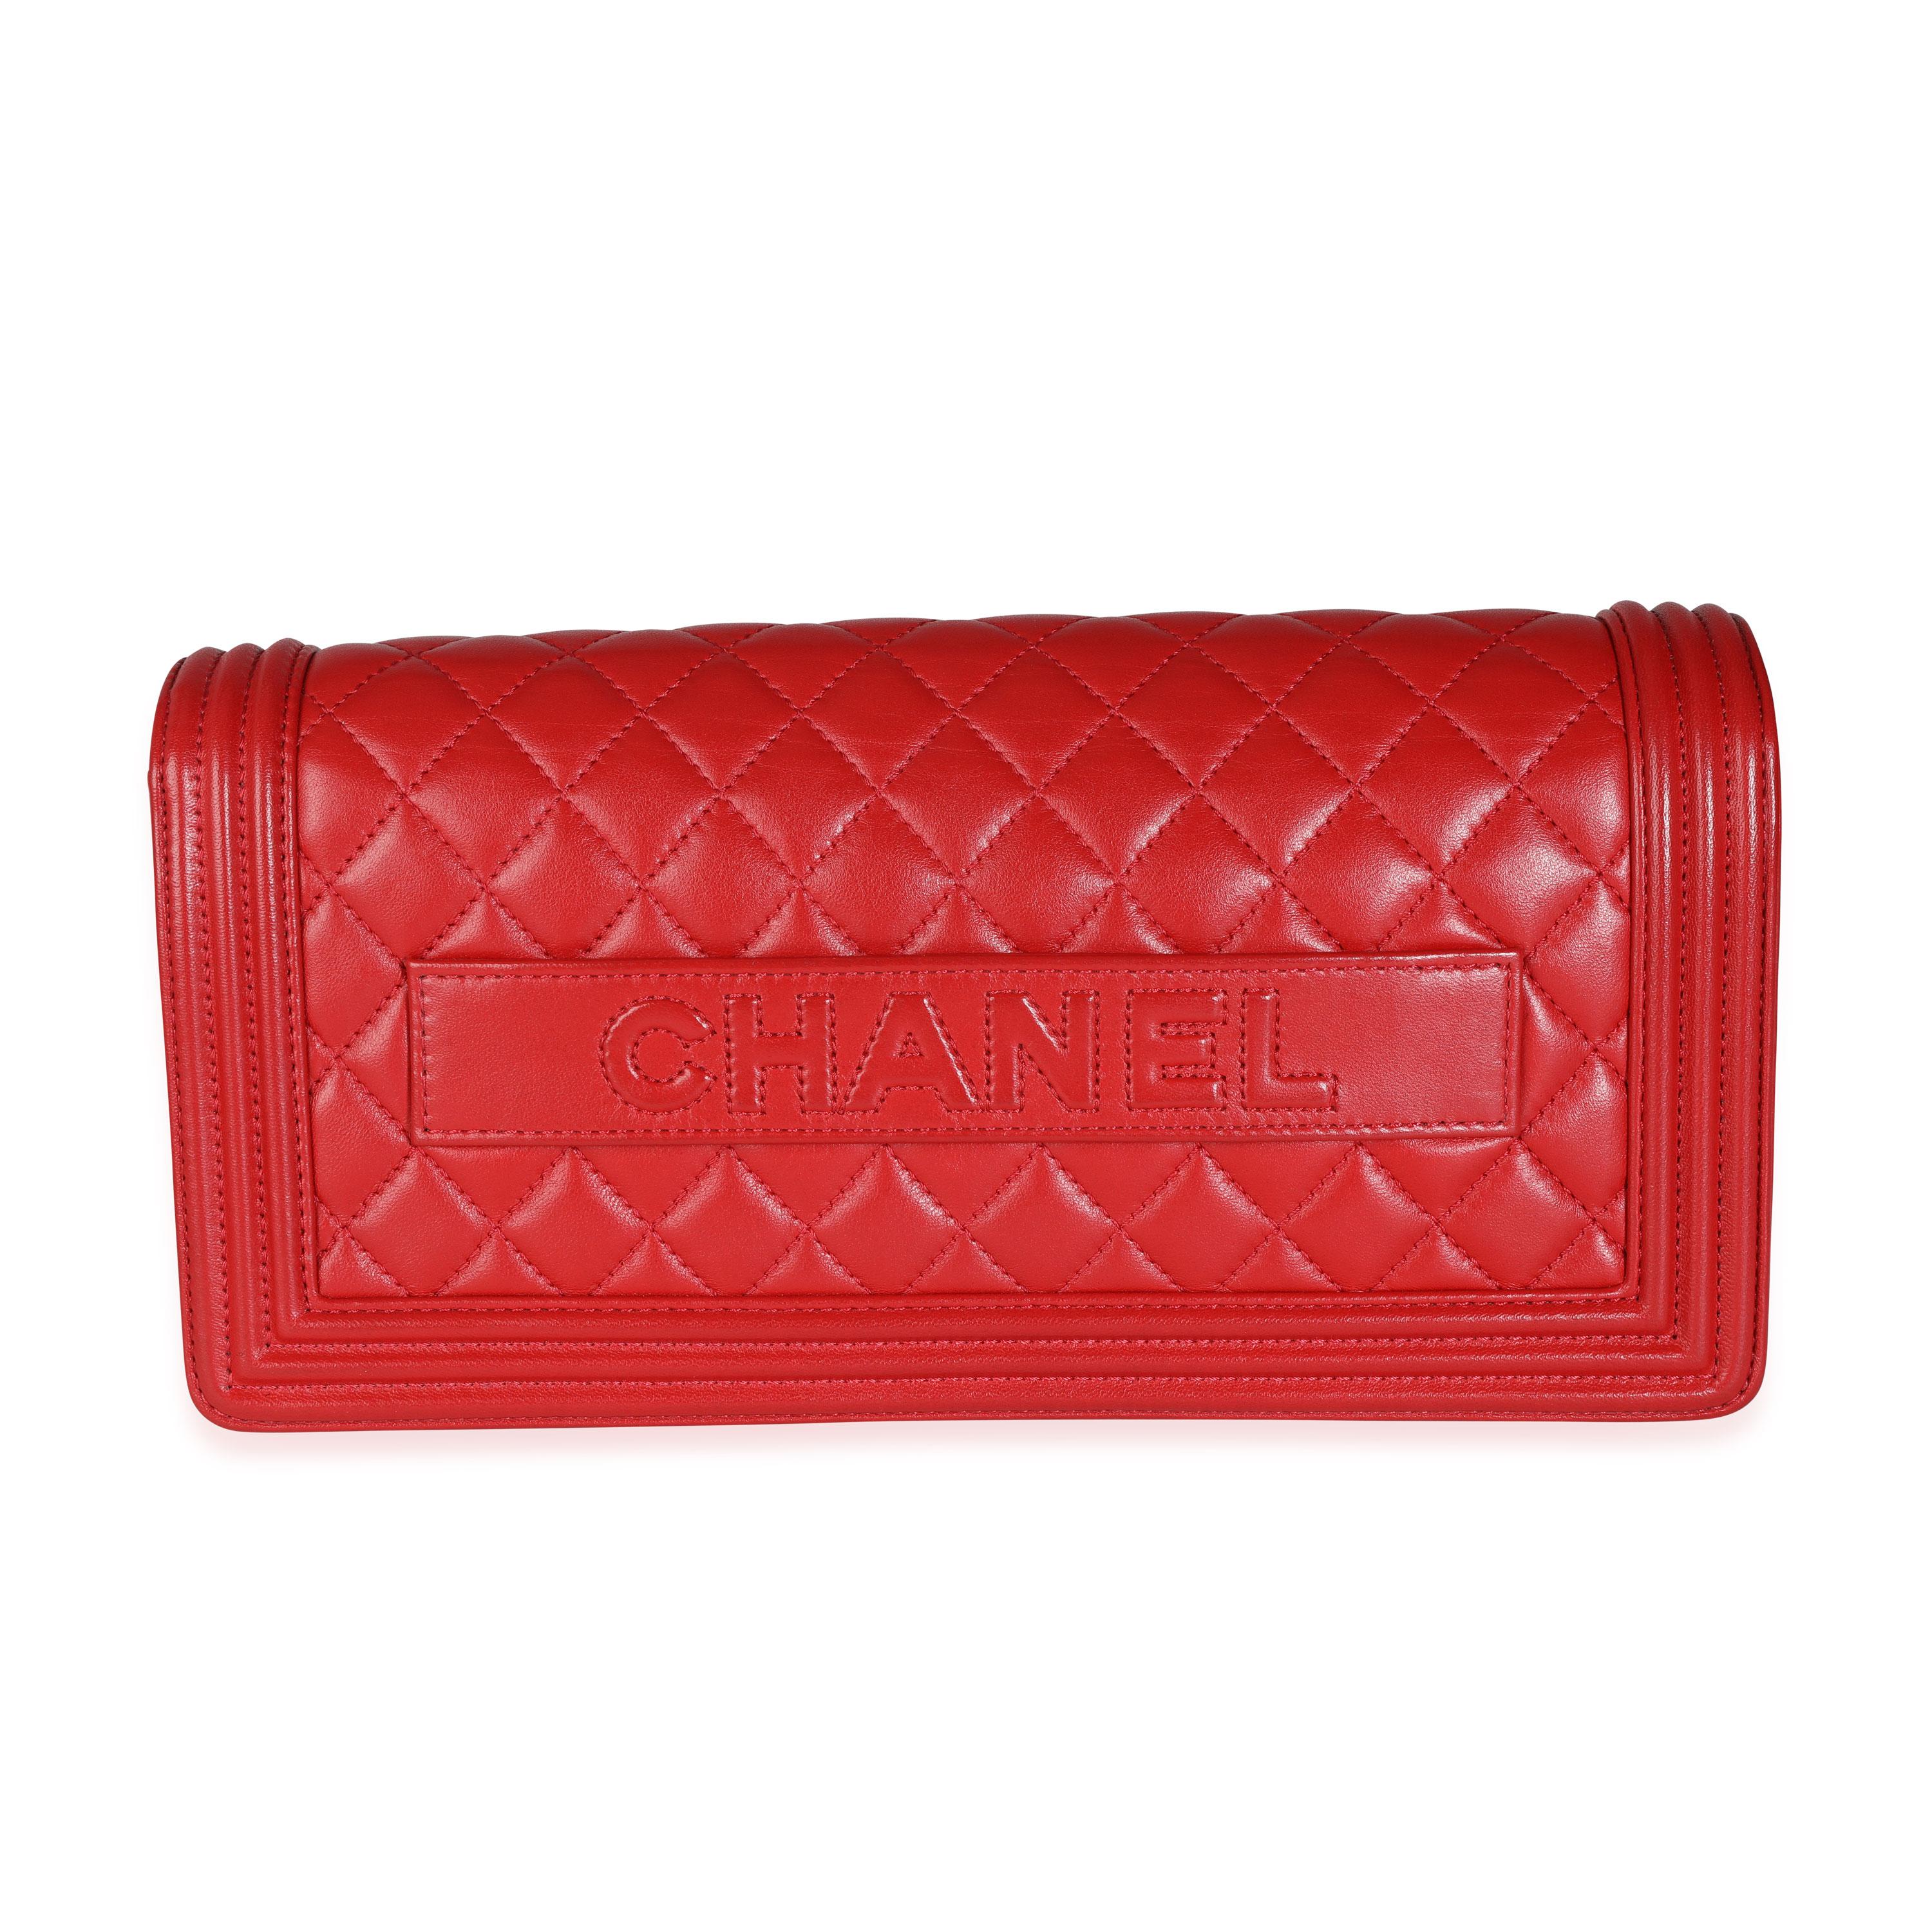 Listing Title: Chanel Red Quilted Lambskin Boy Clutch
SKU: 115091
MSRP: 3600.00
Condition: Pre-owned (3000)
Handbag Condition: Very Good
Condition Comments: Very Good Condition. Scuffing to interior.
Brand: Chanel
Model: Boy Clutch
Origin Country: